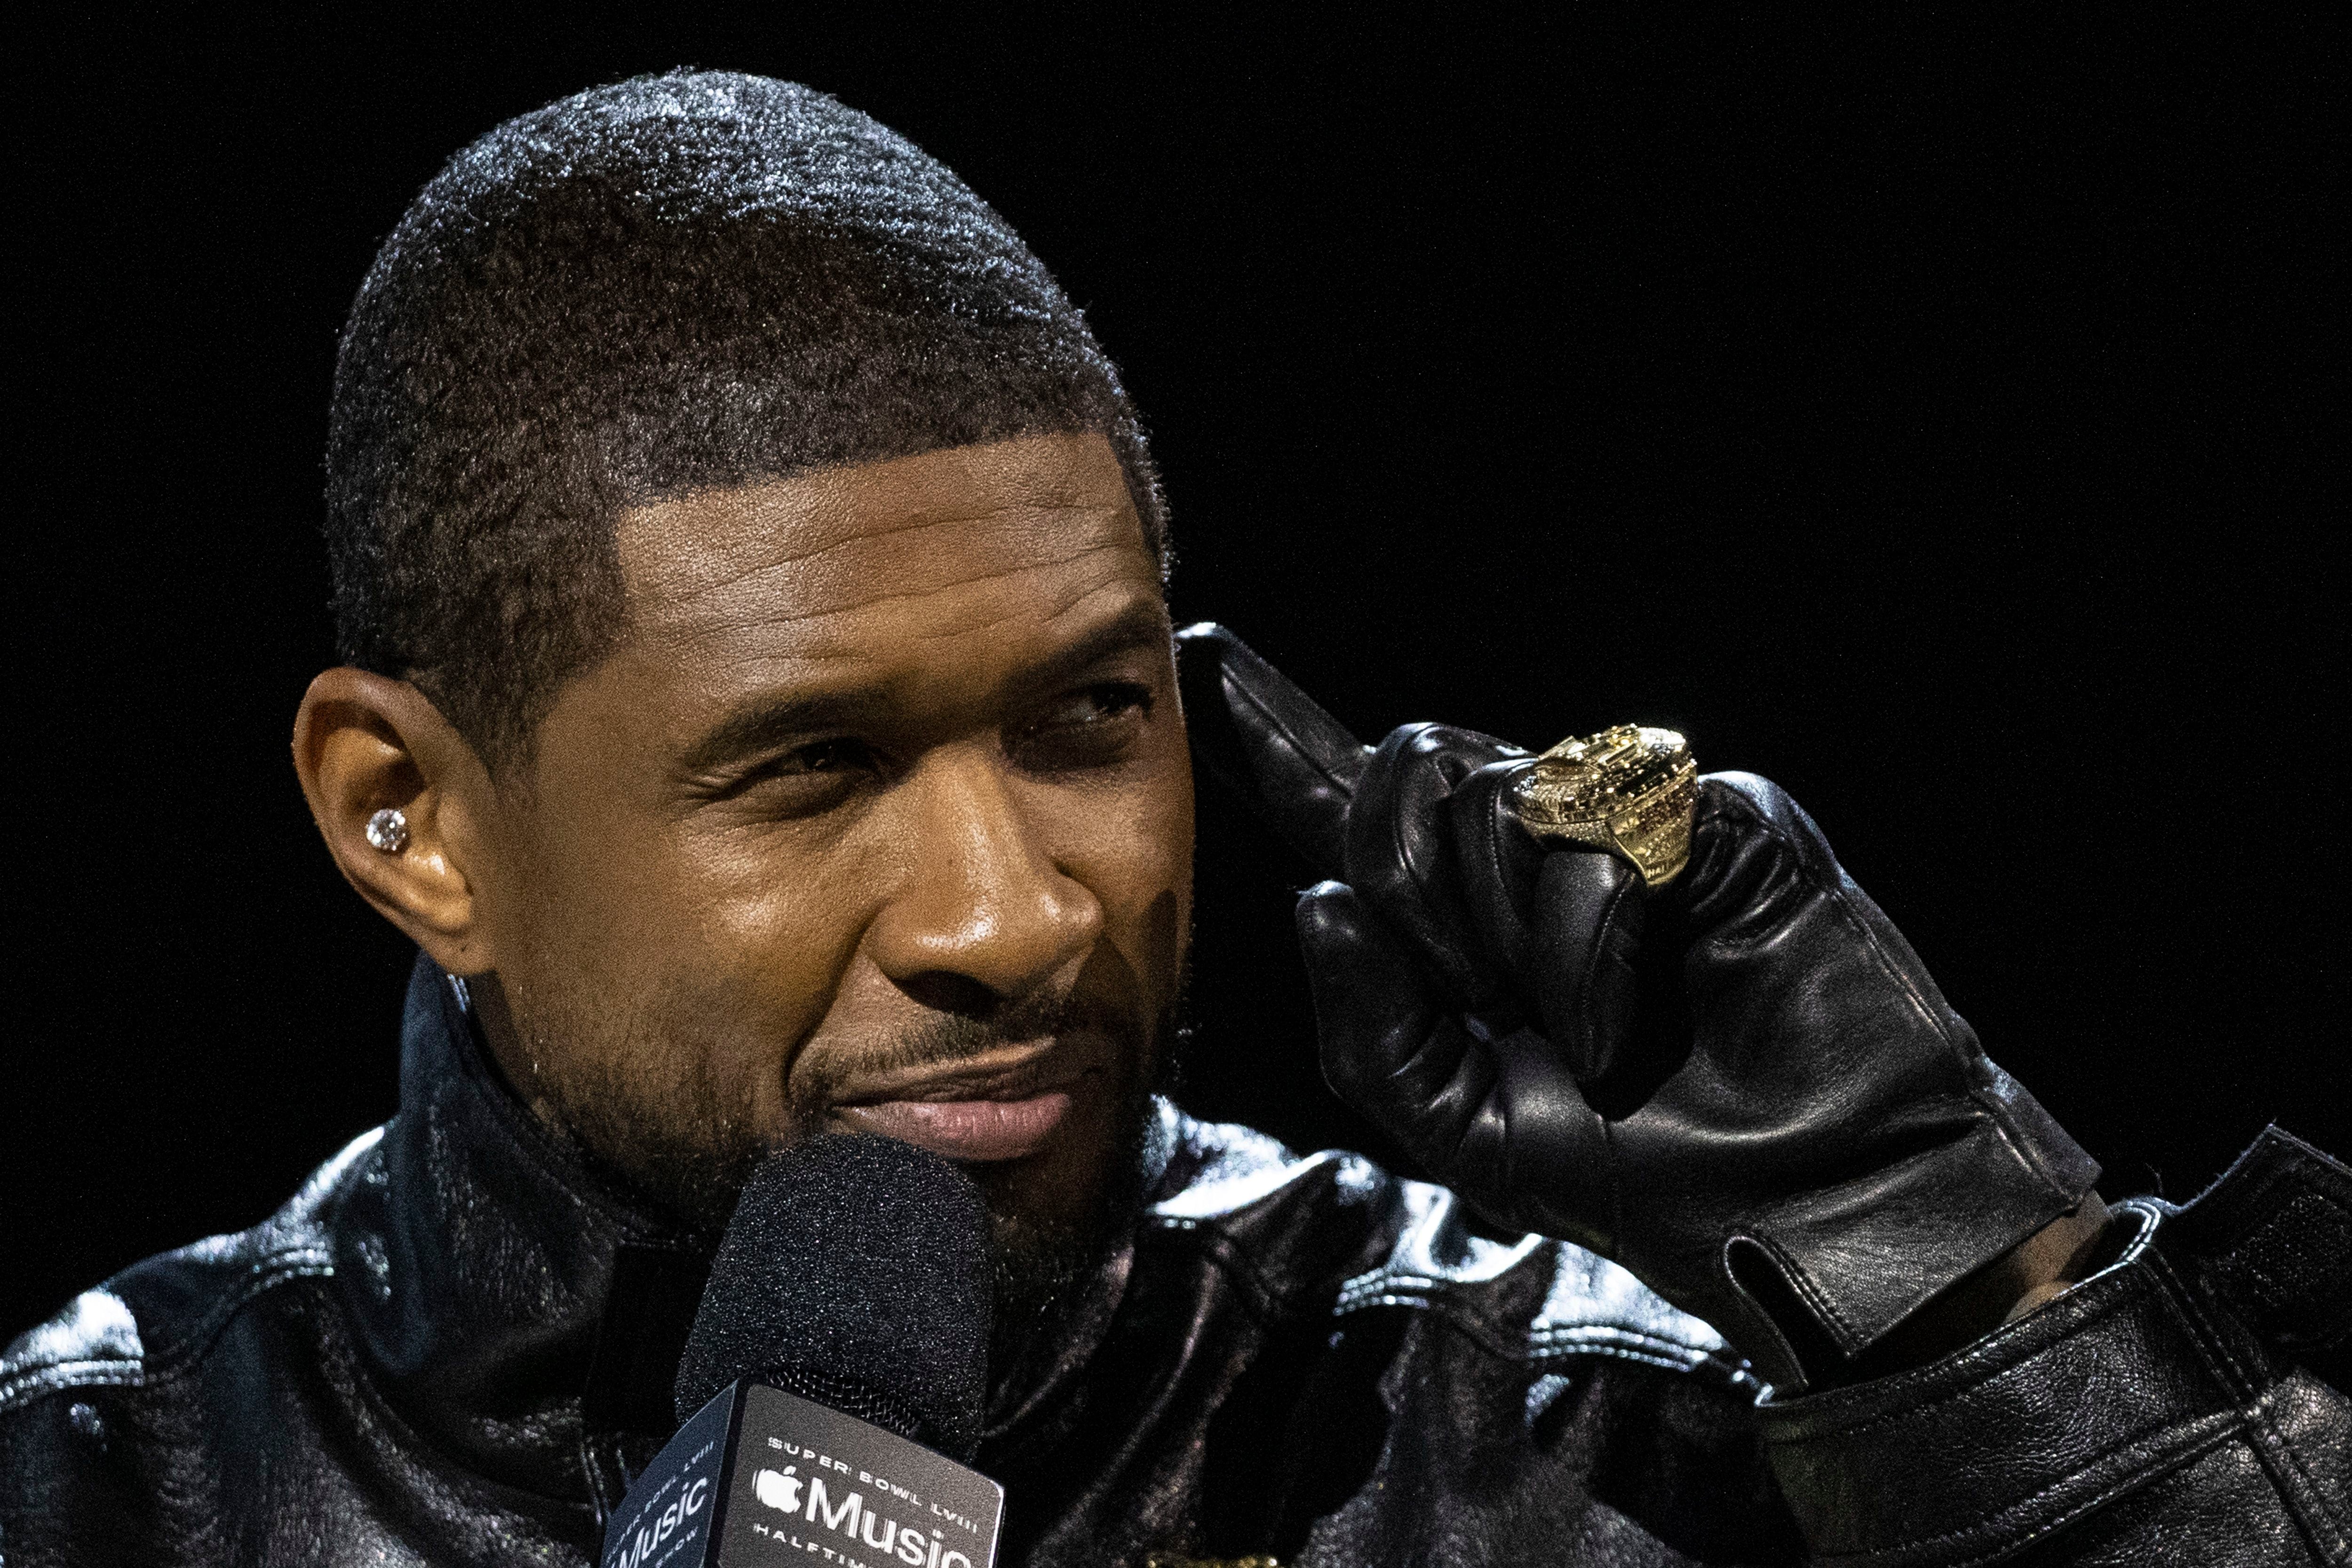 Which NFL team is Super Bowl Halftime Show performer Usher a fan of?